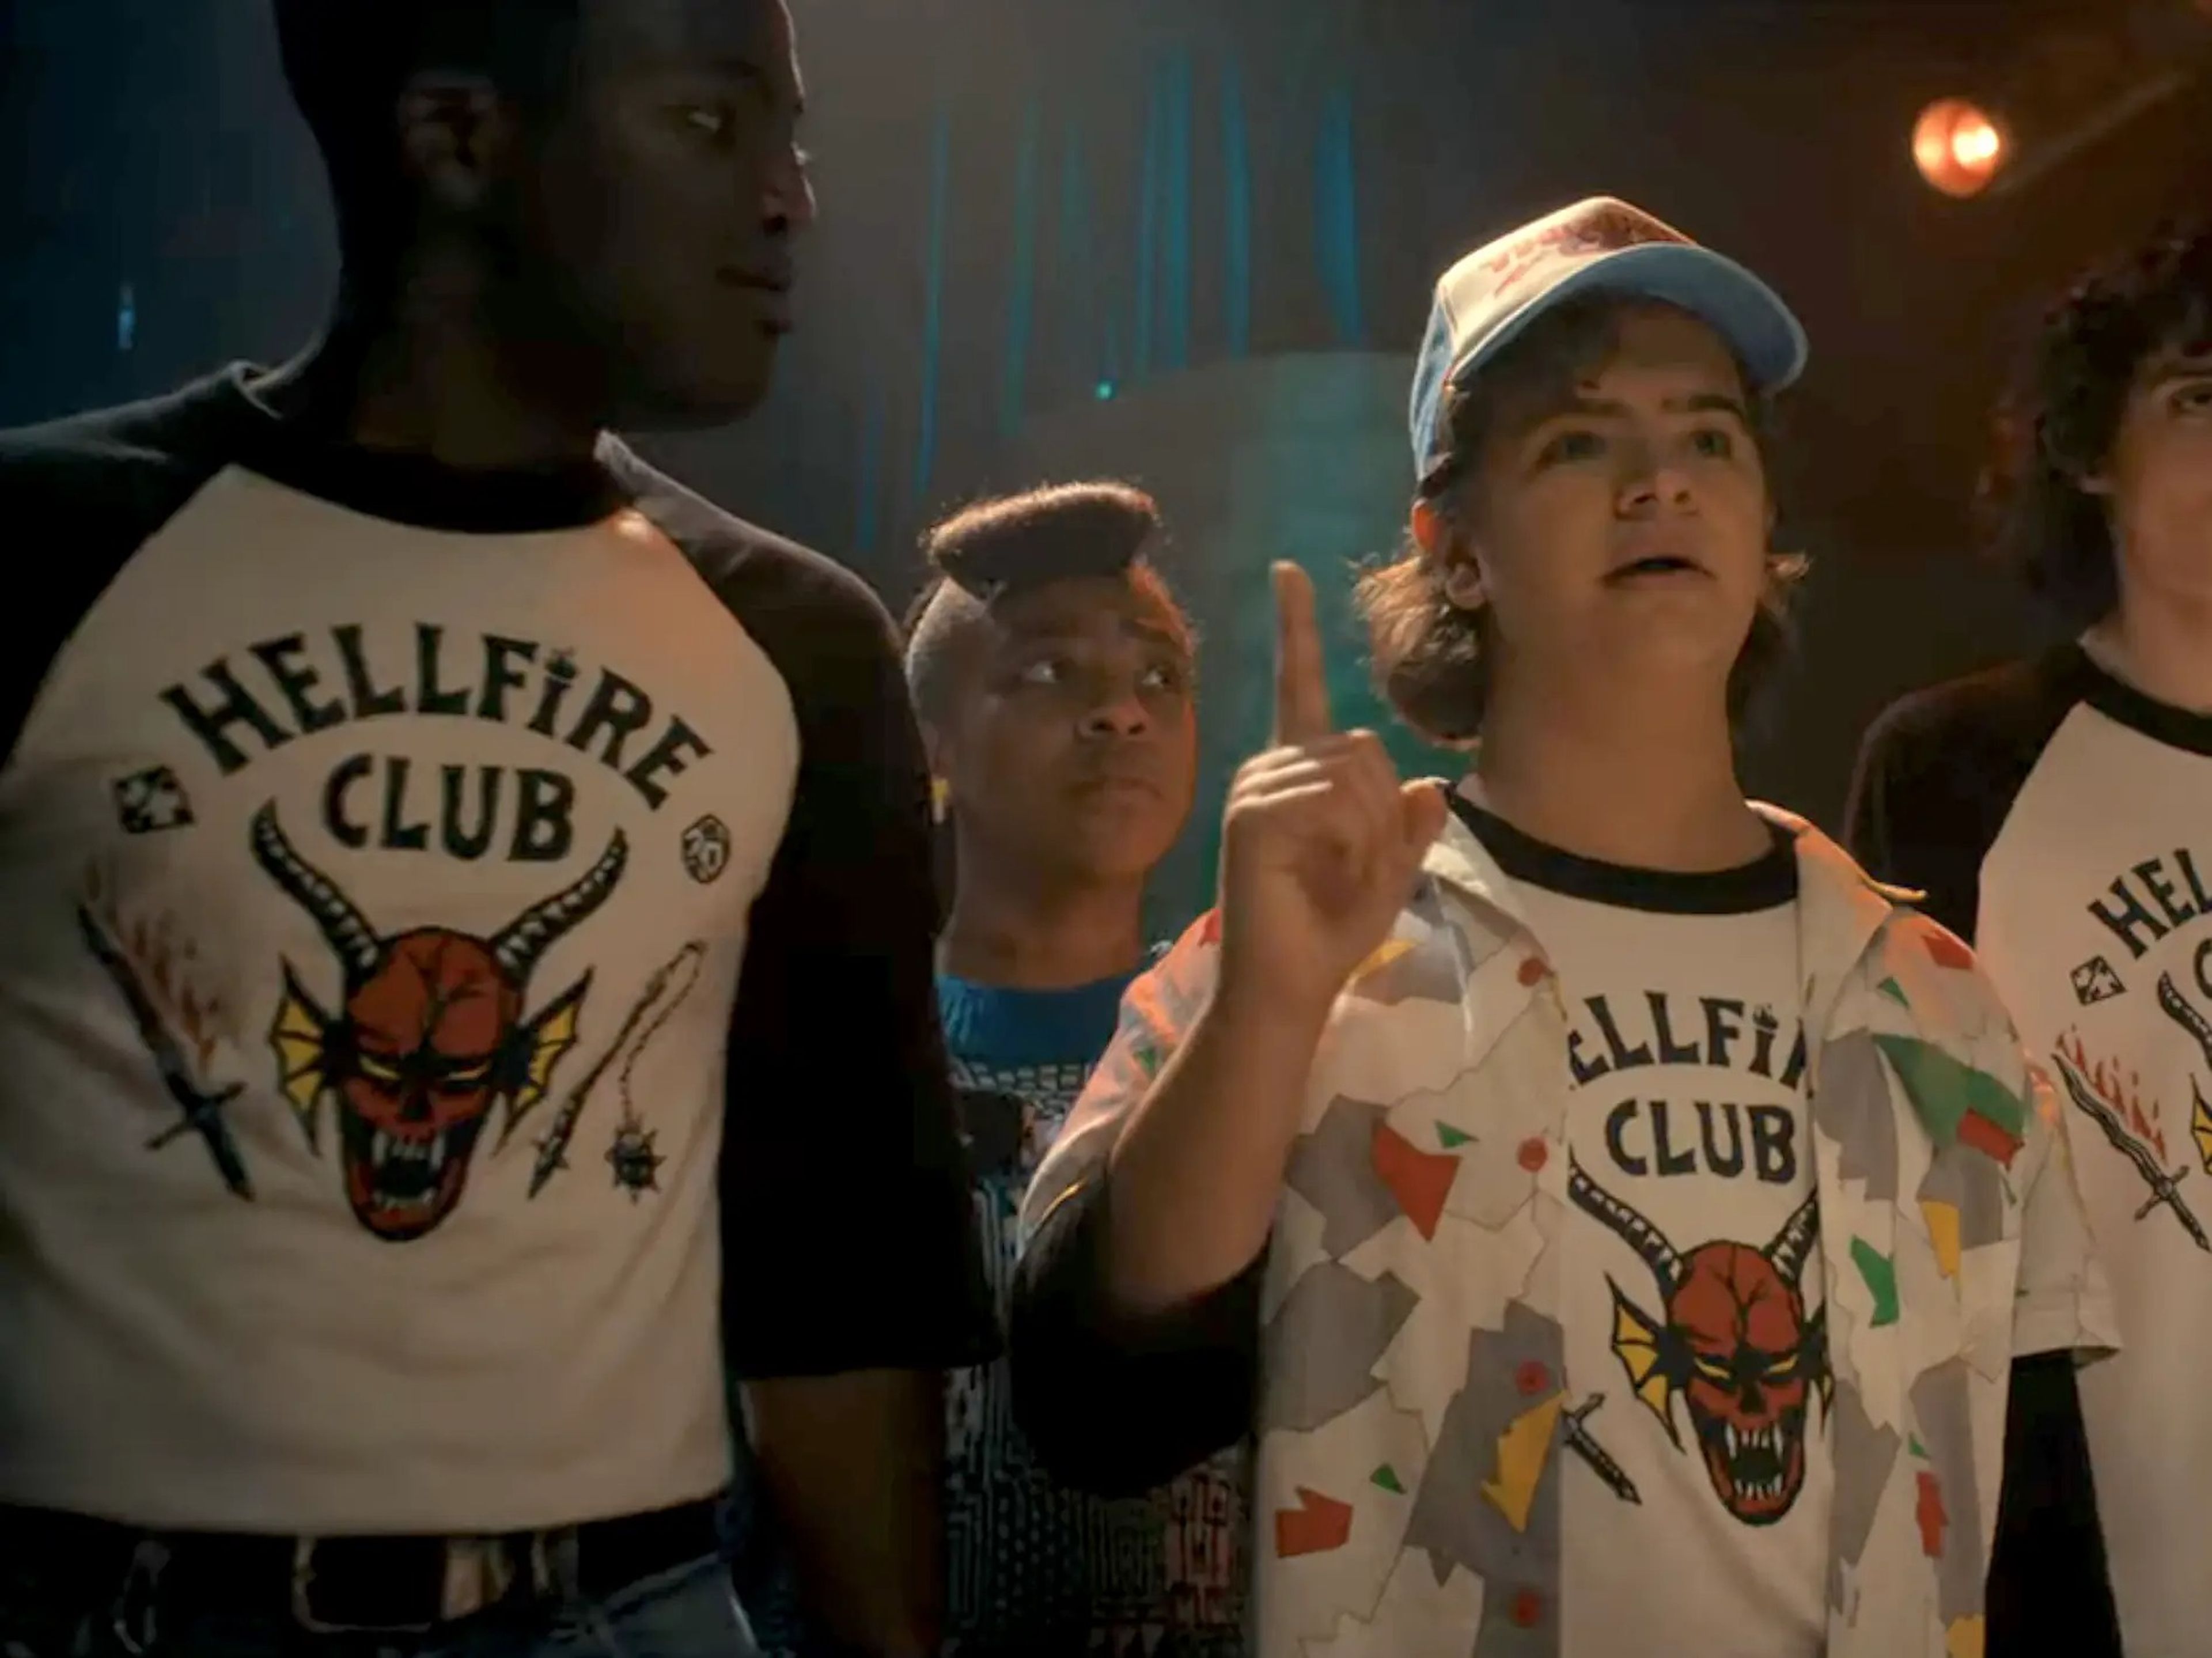 A scene from Netflix's sci-fi series "Stranger Things," showing four teenagers wearing matching shirts that say "Hellfire Club."